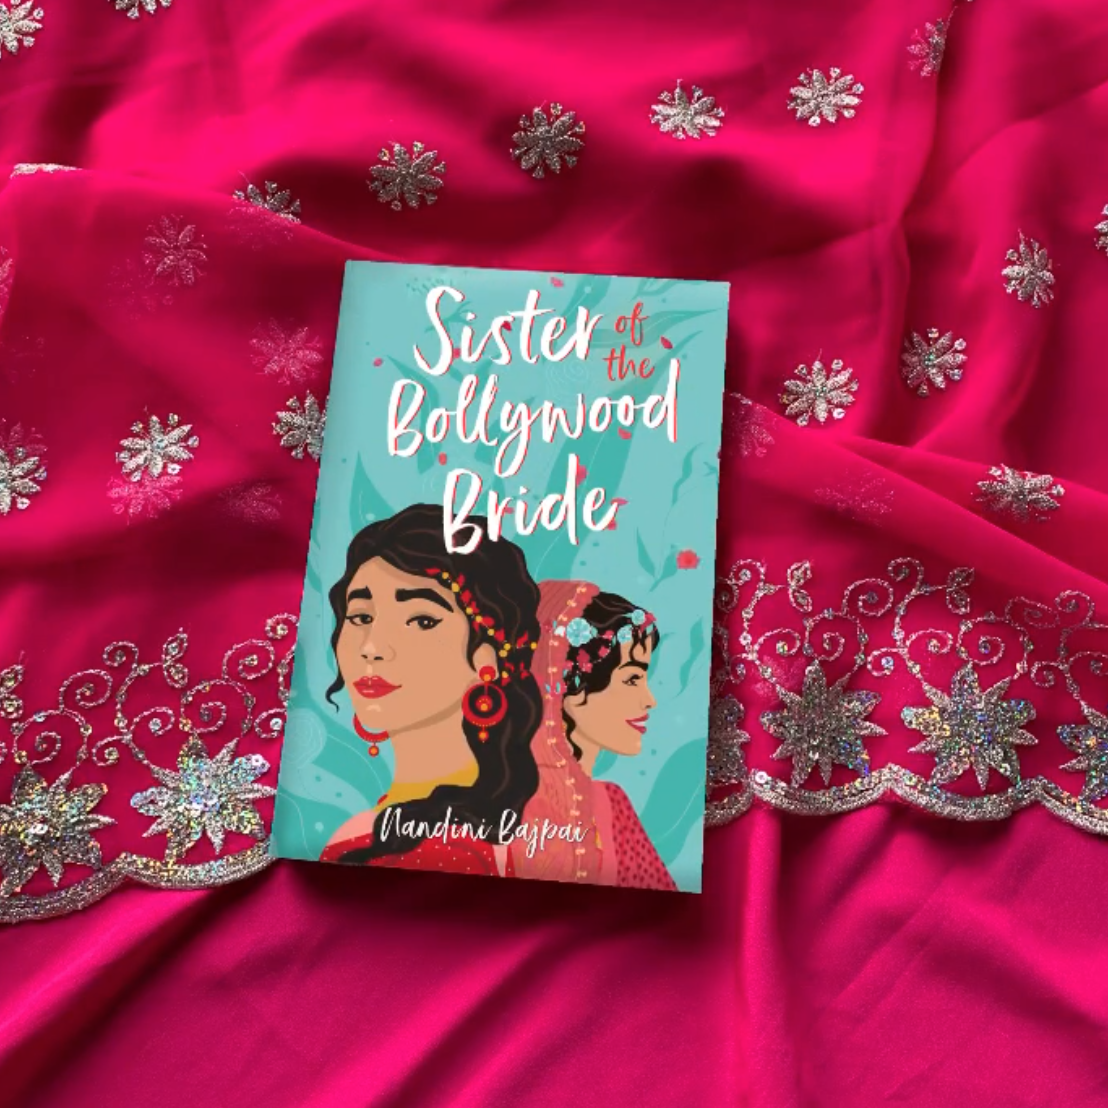 Instagram image of the book "Sister of the Bollywood Bride" by Nandini Bajpai